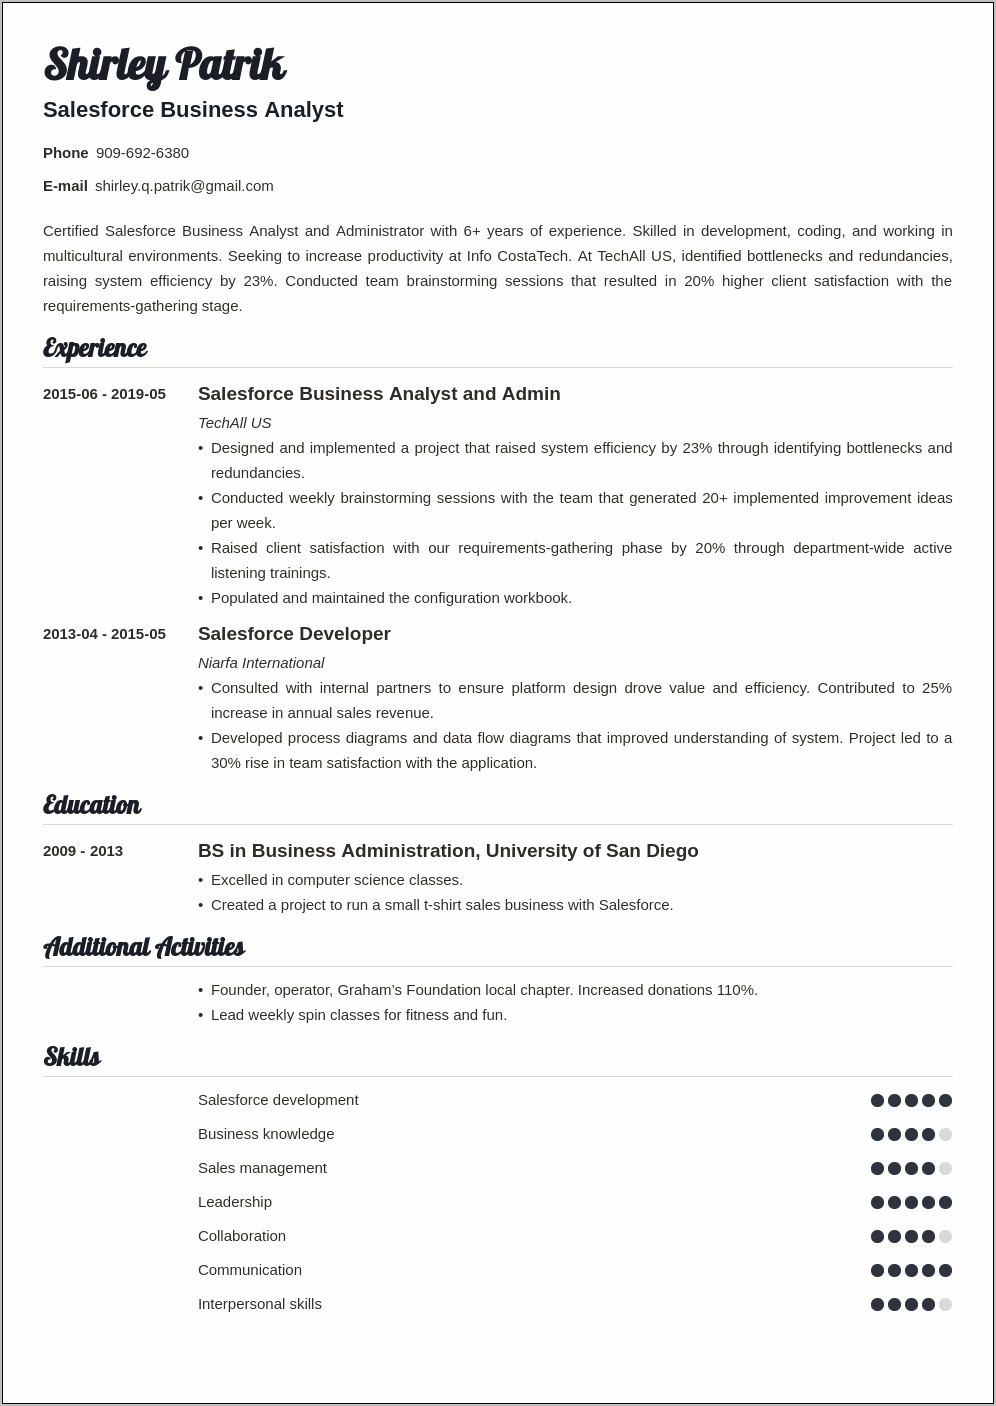 Salesforce Resume With Ad Studio Experience